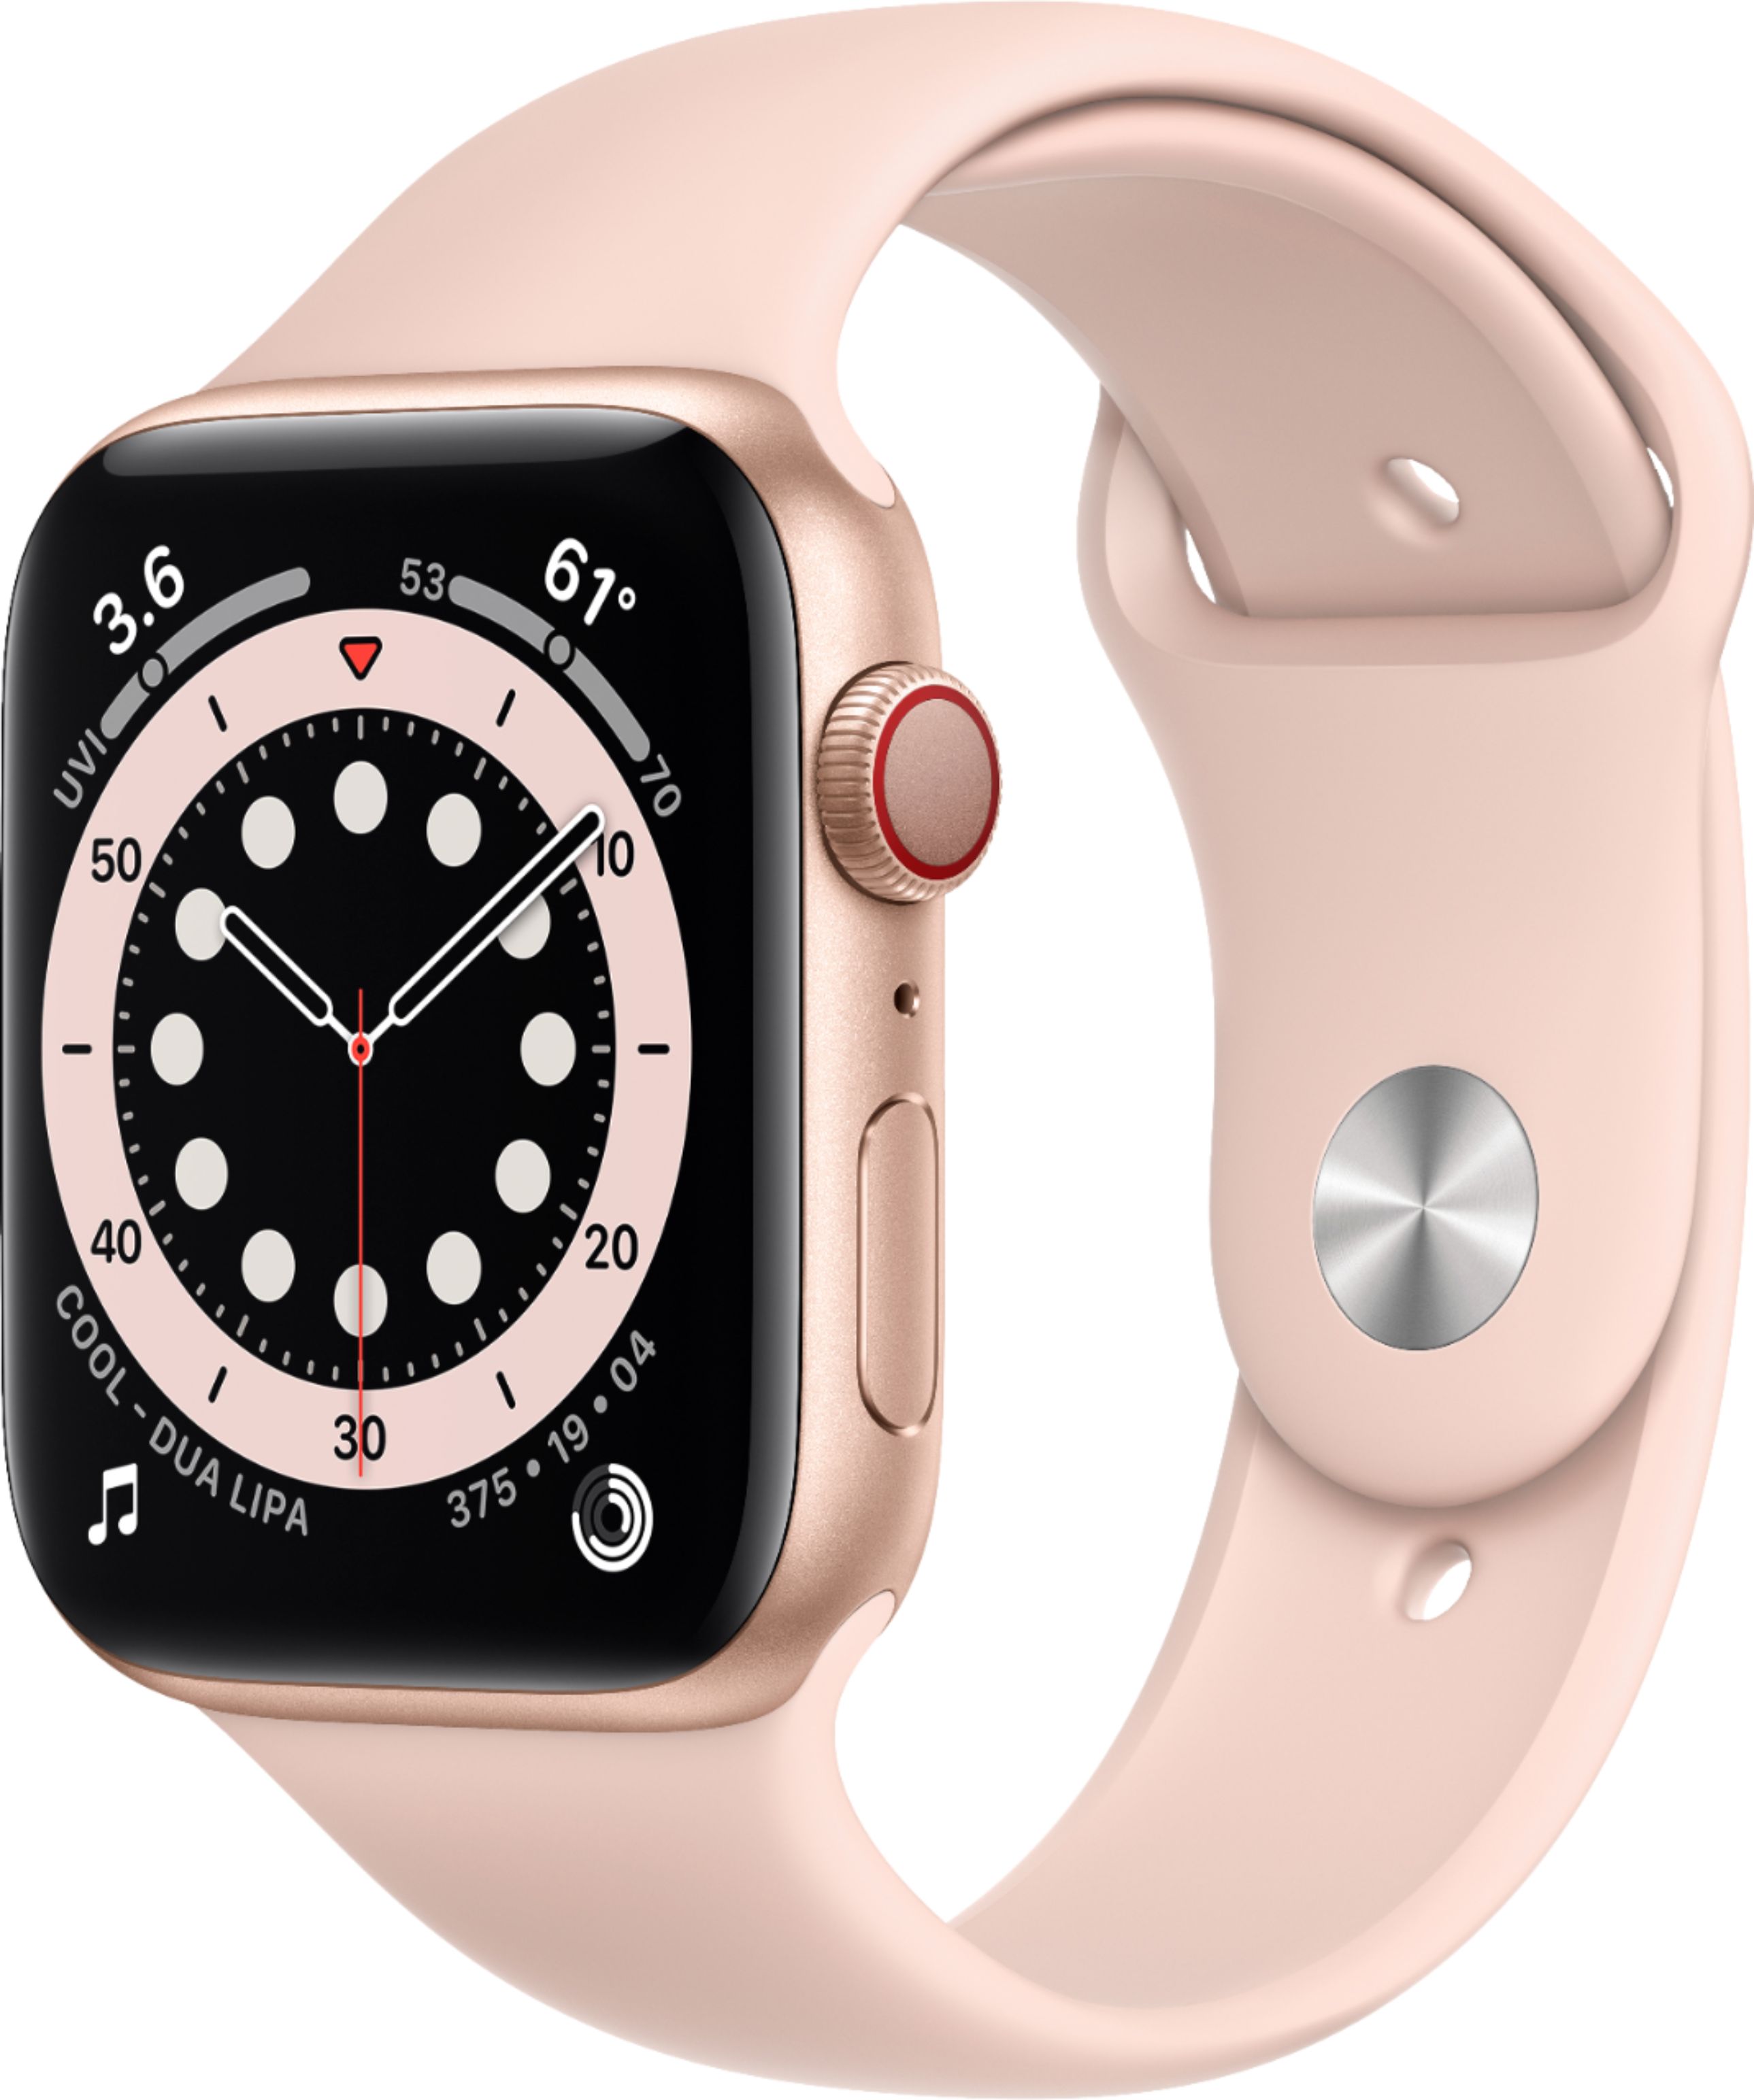 Apple Watch series 6 cellular アルミ 44mm - その他